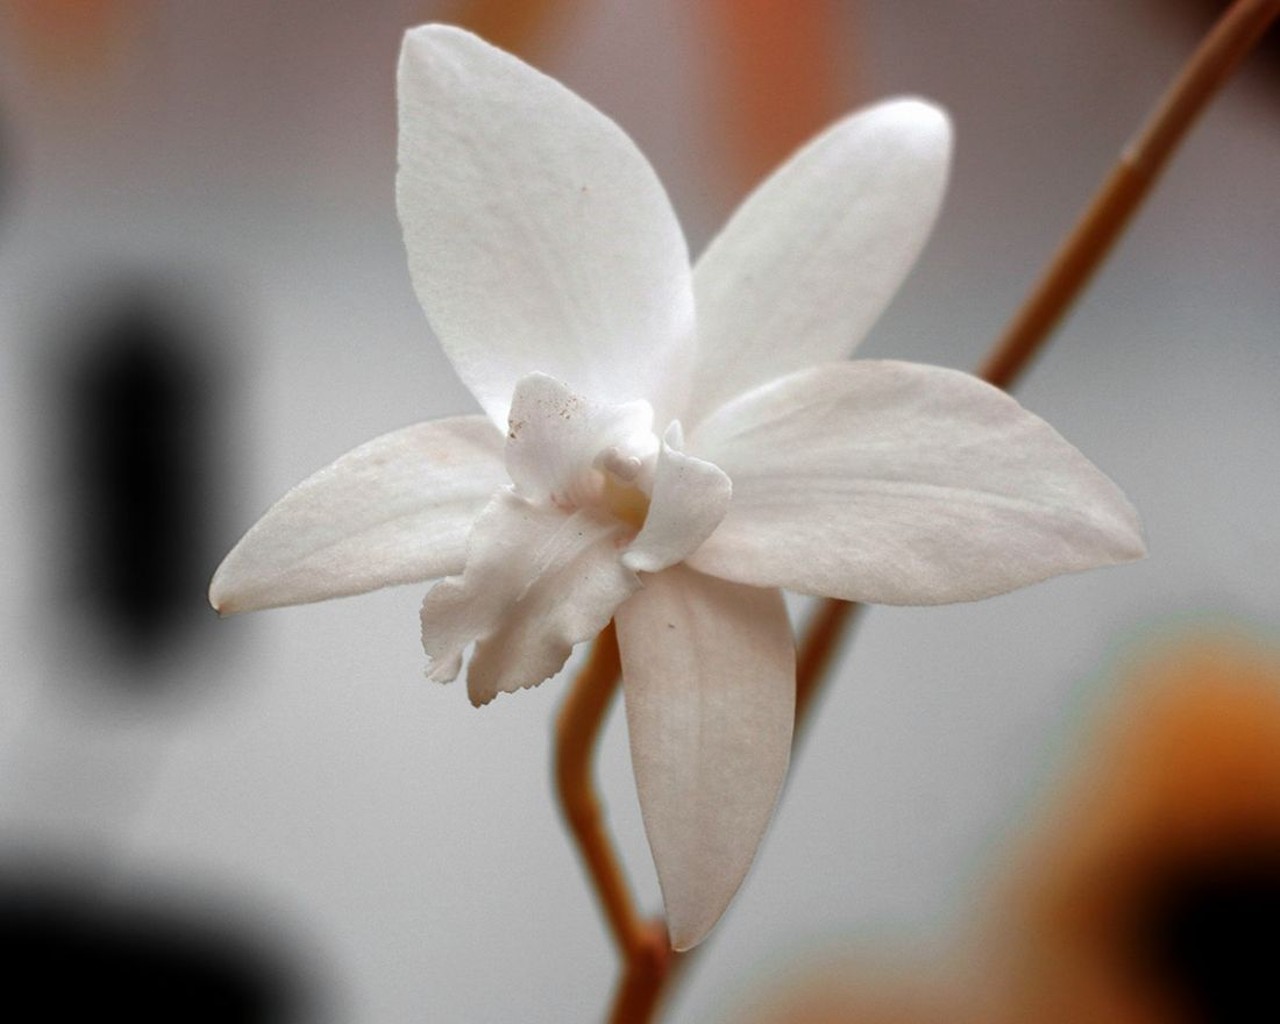 MoBOT's Orchids Look Gorgeous in New Photos